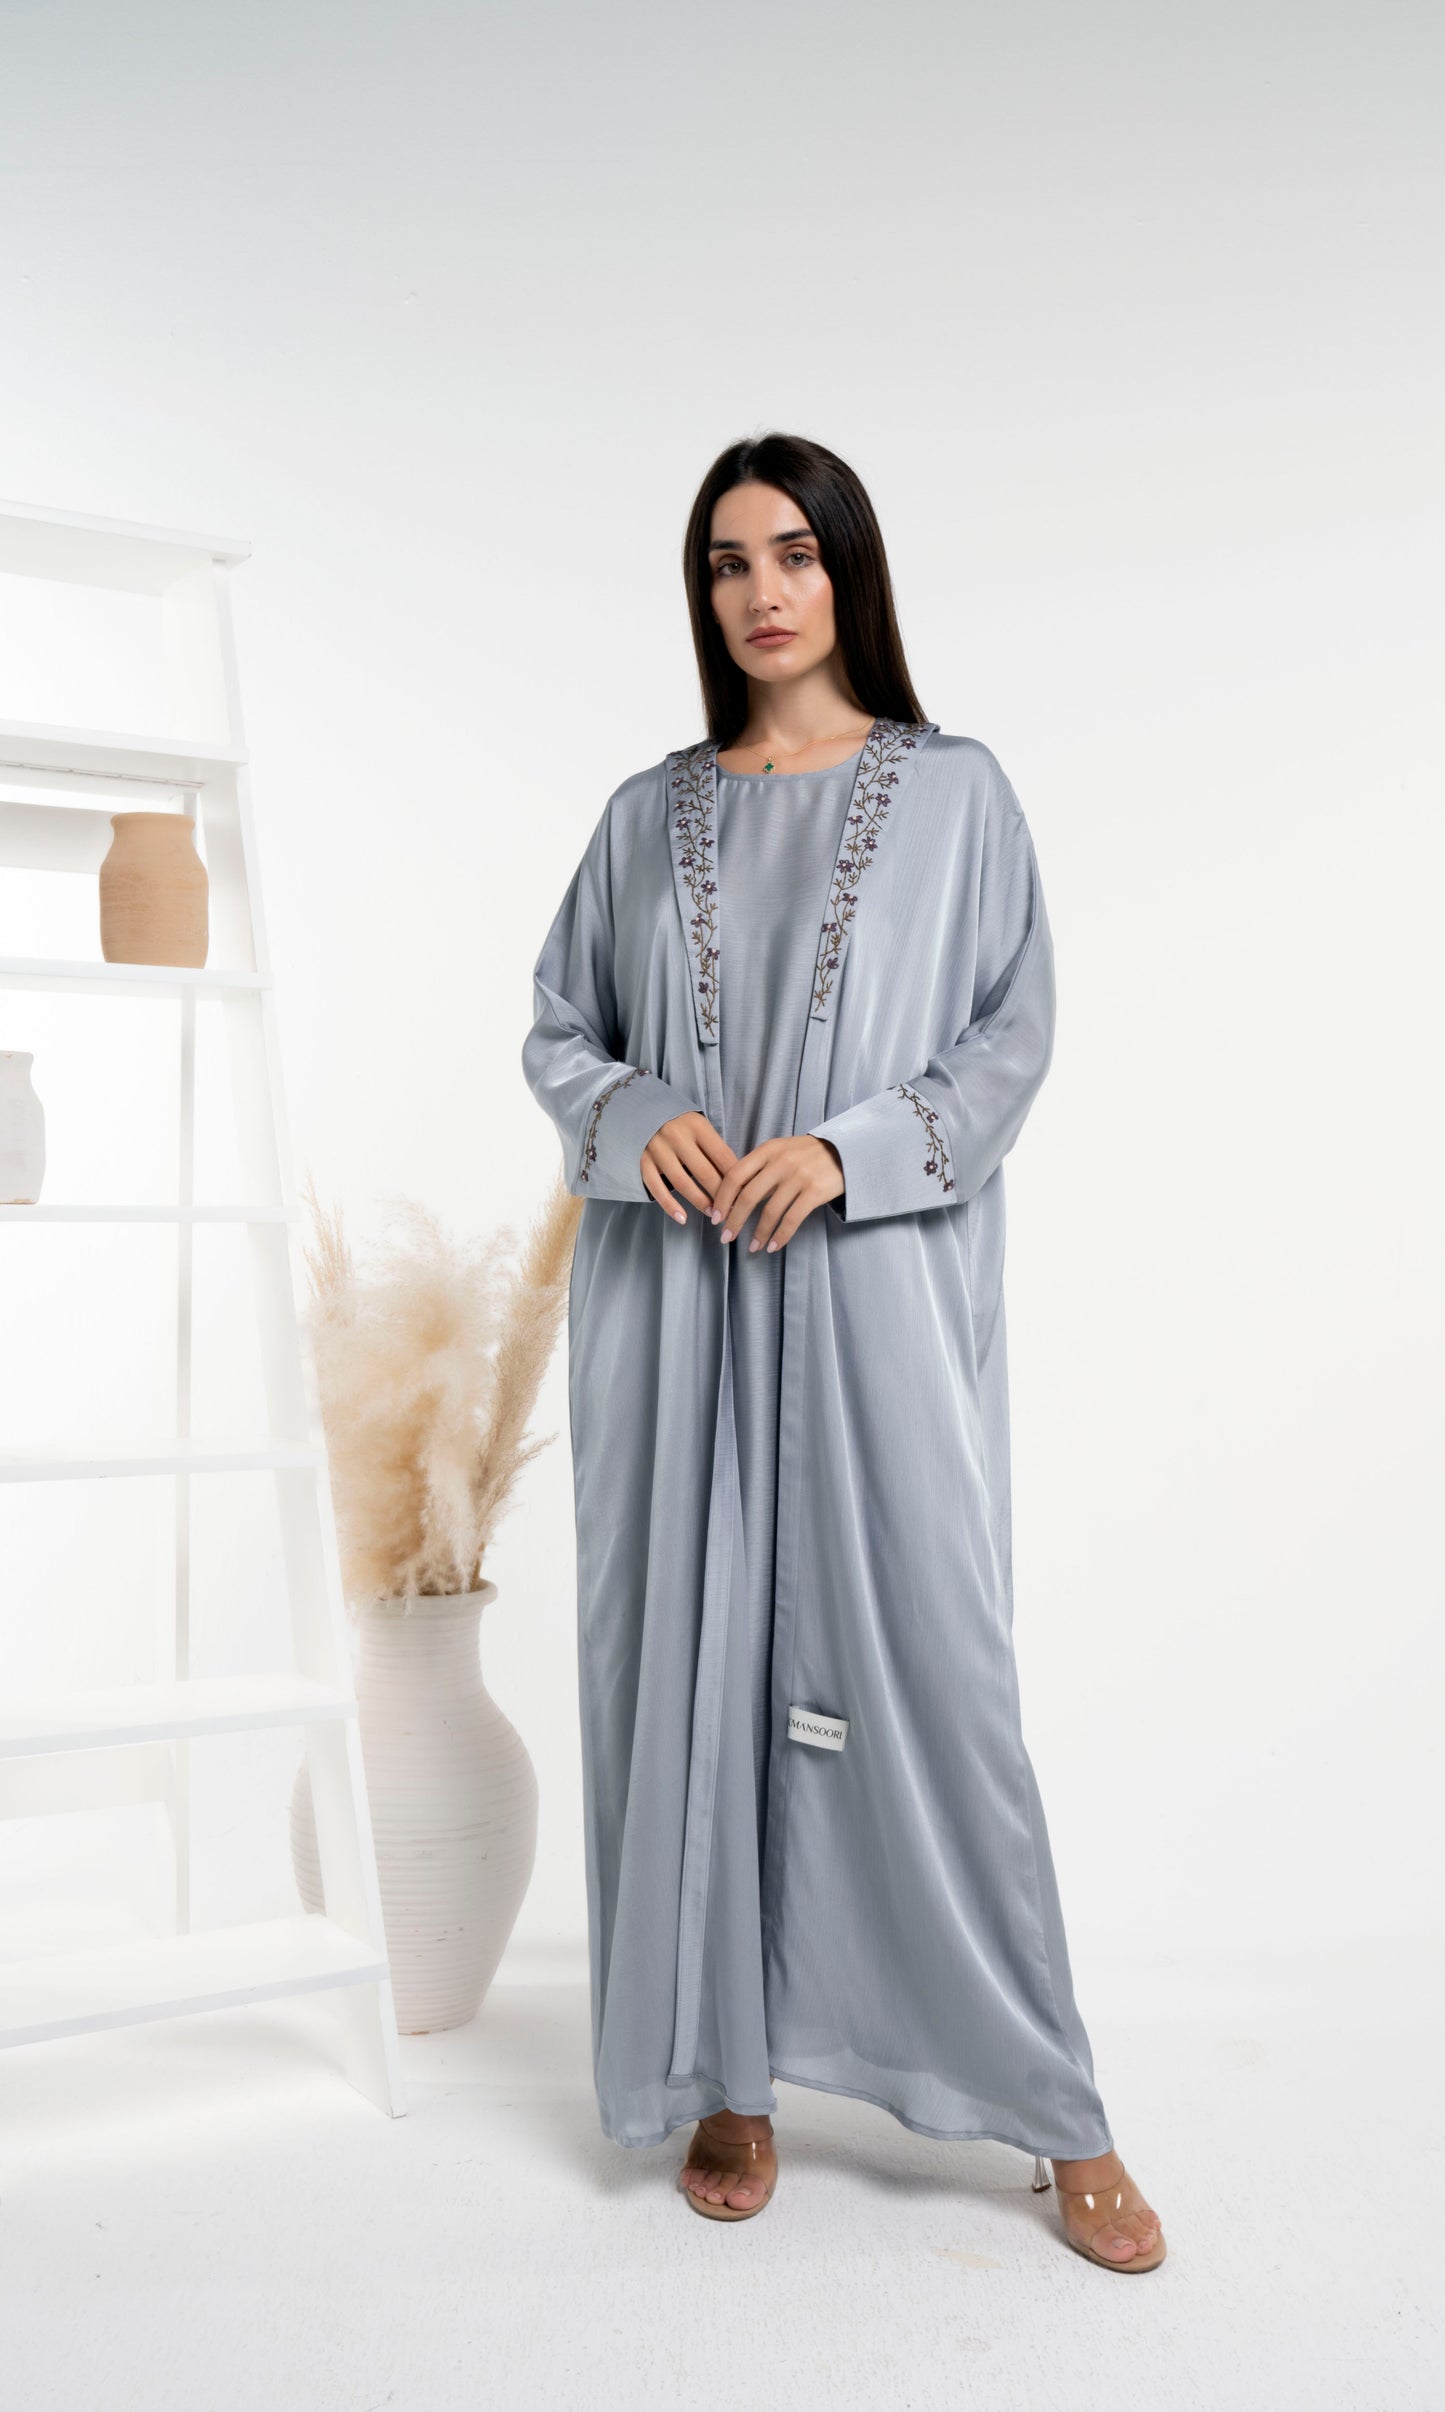 Grey silk satin abaya with floral embroidery on collar and cuff sleeves